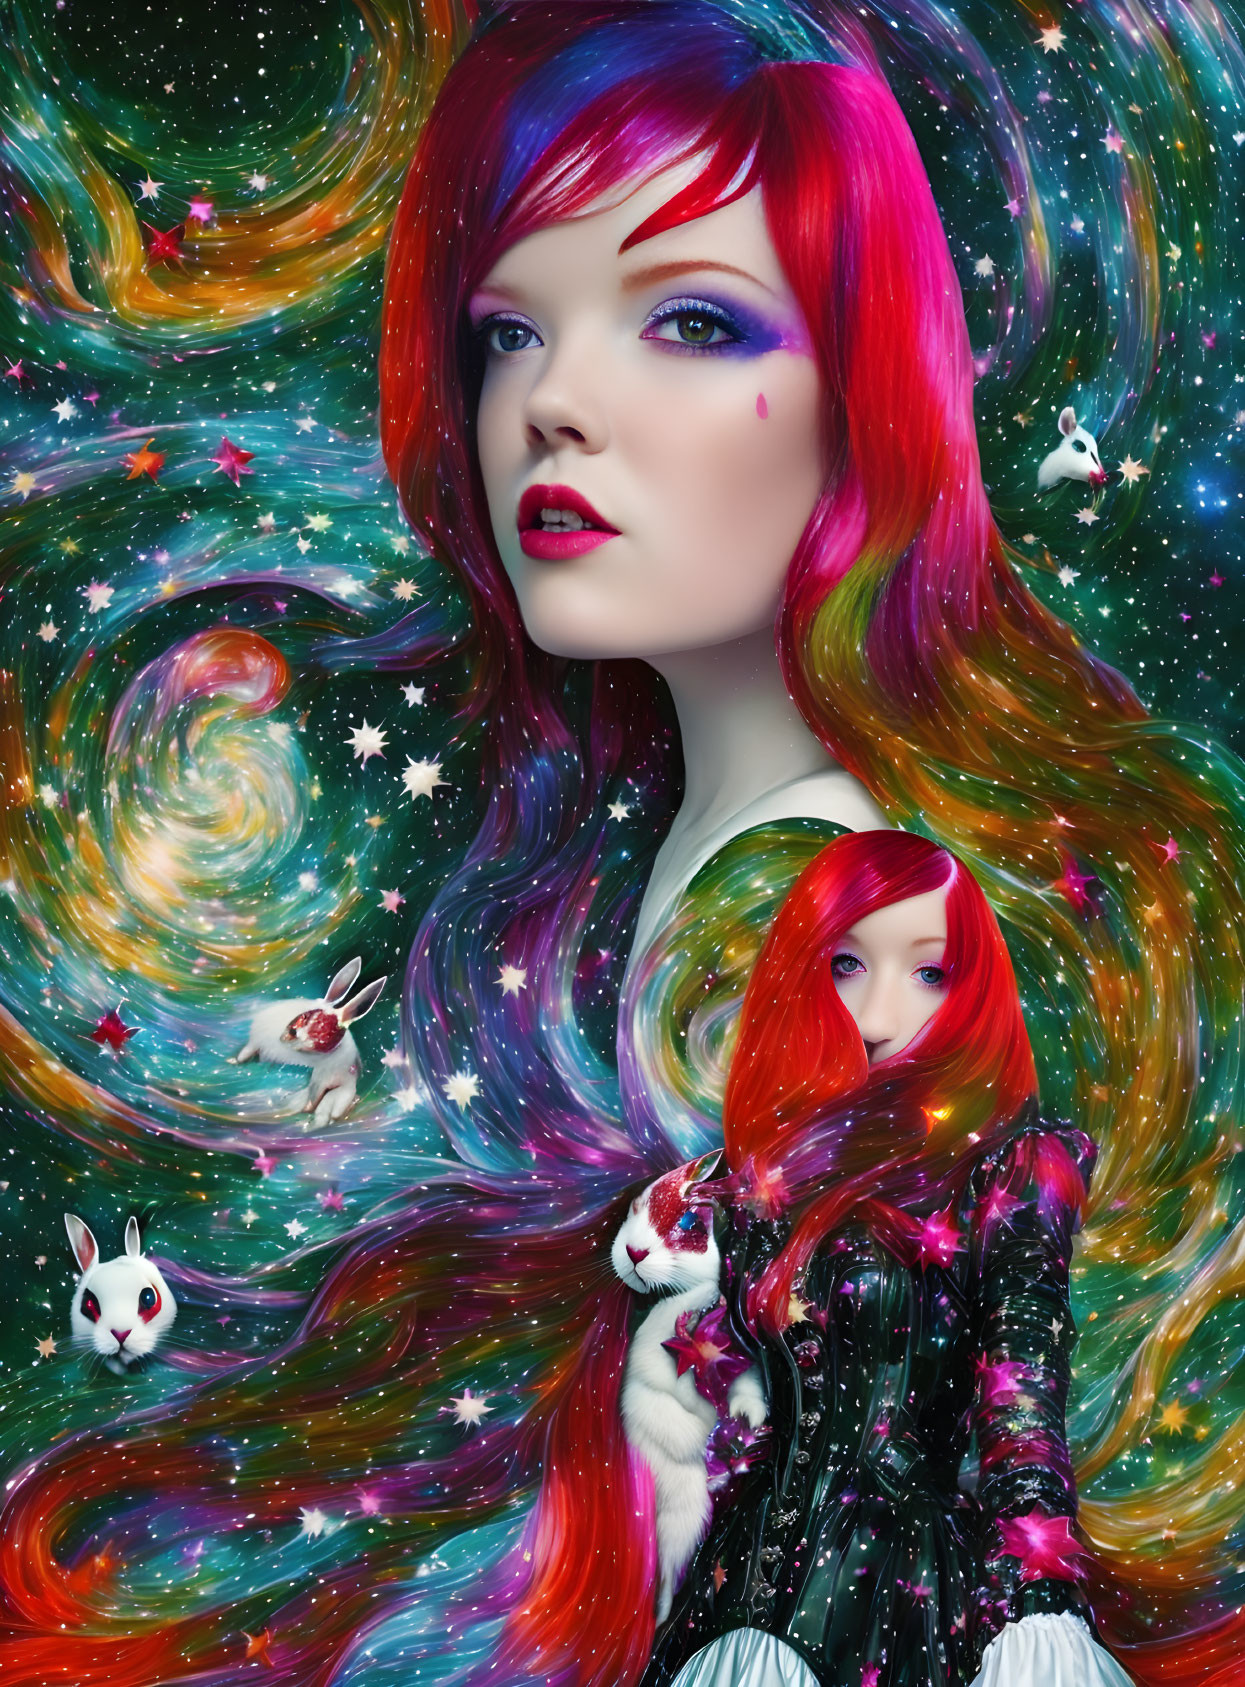 Colorful digital artwork: woman with multicolored hair in cosmic setting.